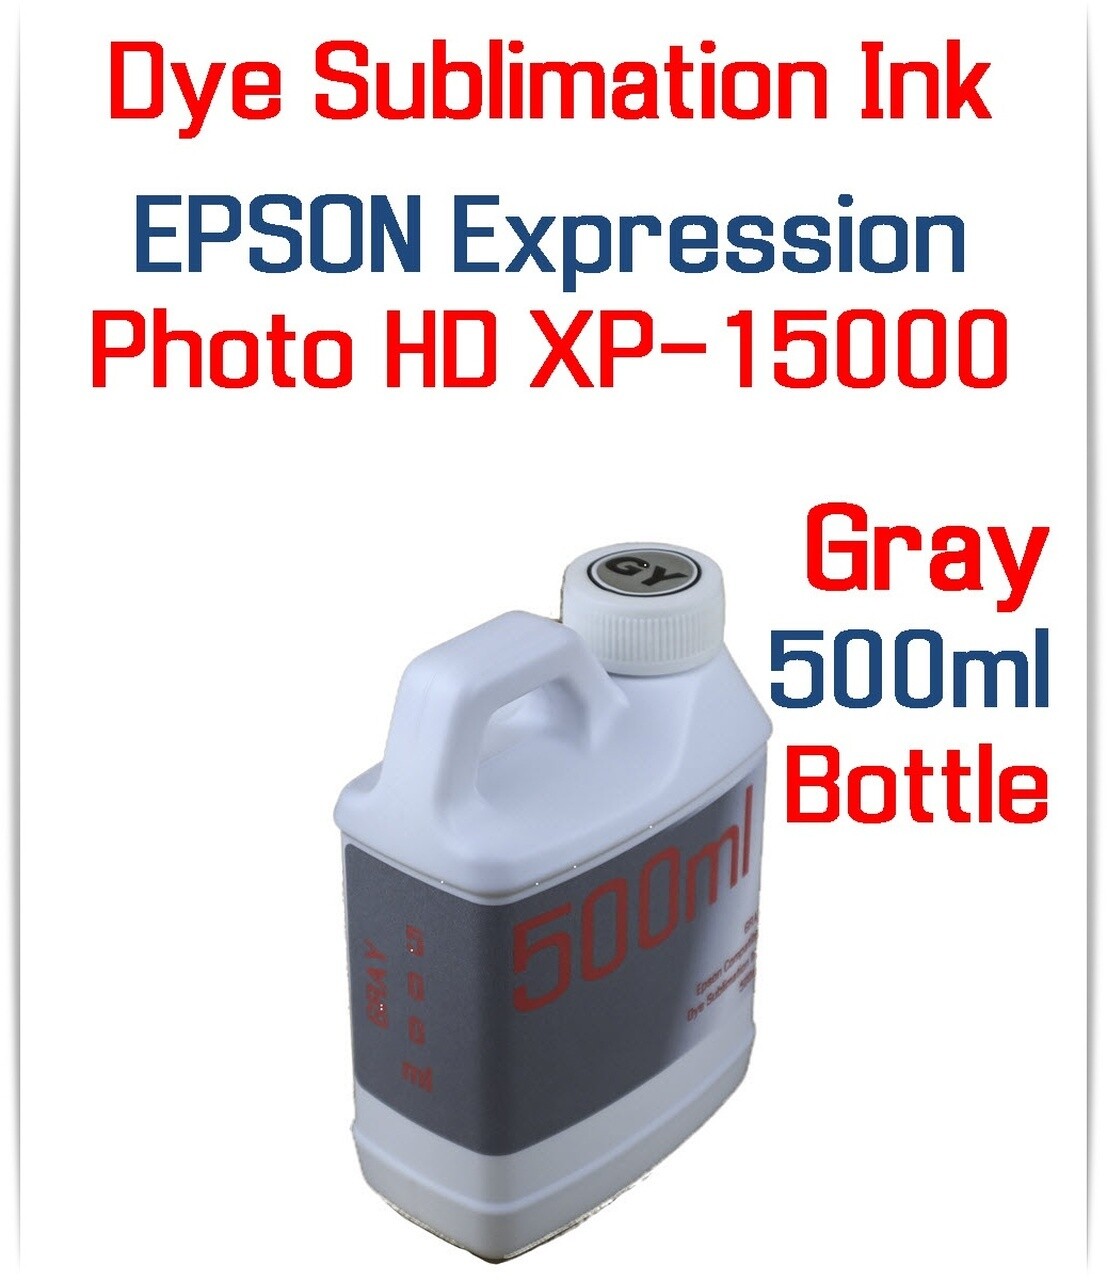 Gray Dye Sublimation Ink 500ml for Epson Expression Photo HD XP-15000 printer